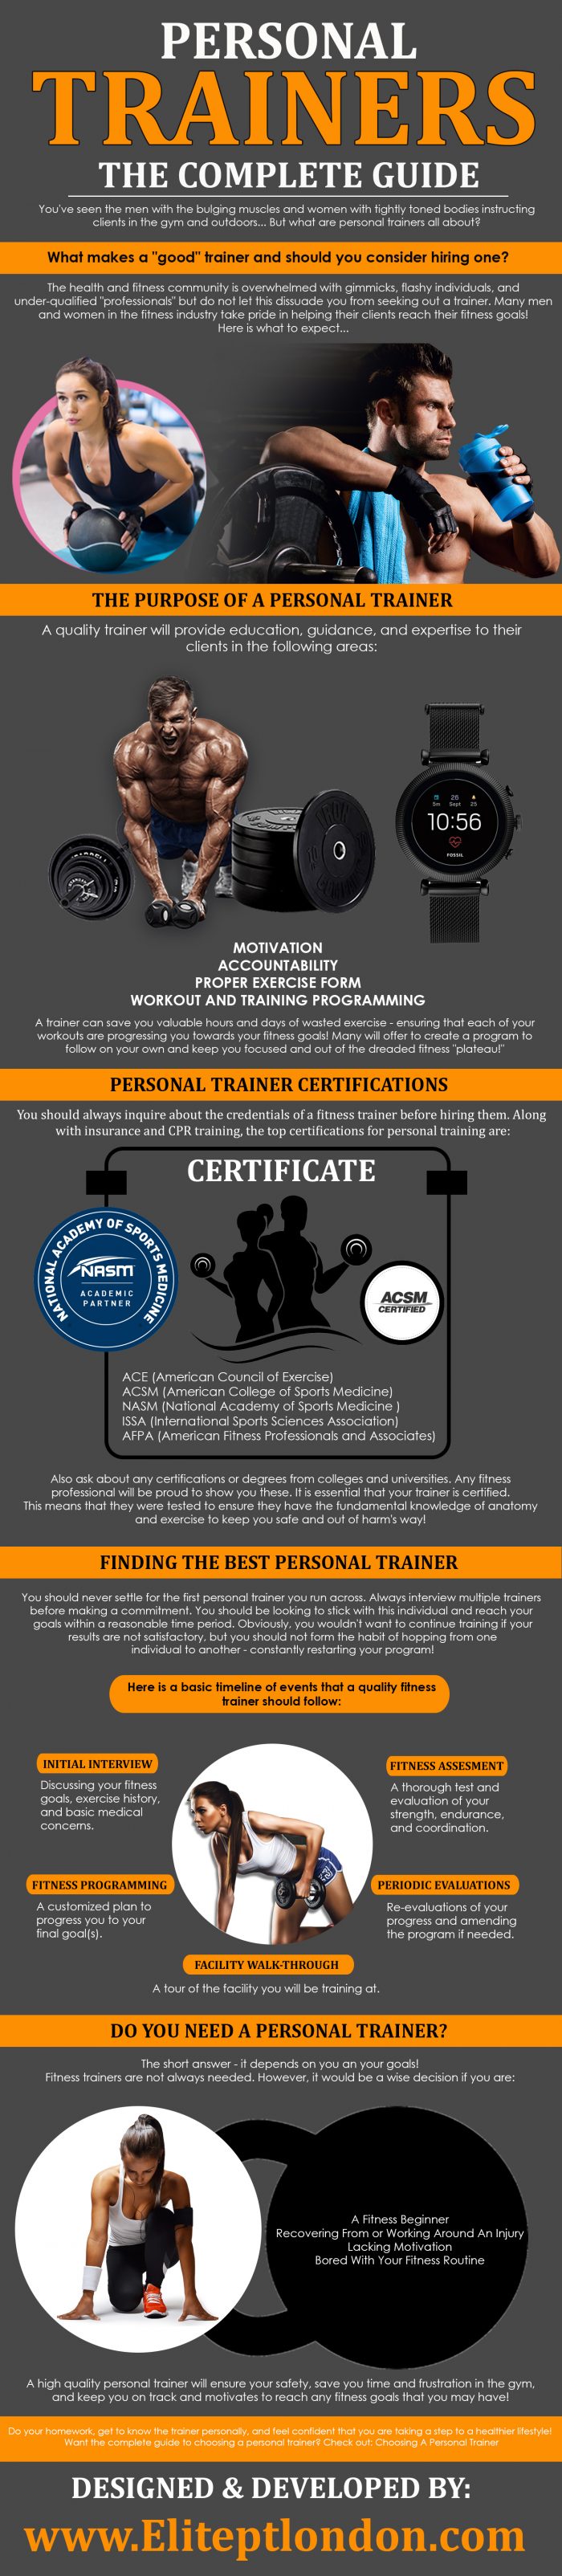 PERSONAL TRAINERS – THE COMPLETE GUIDE